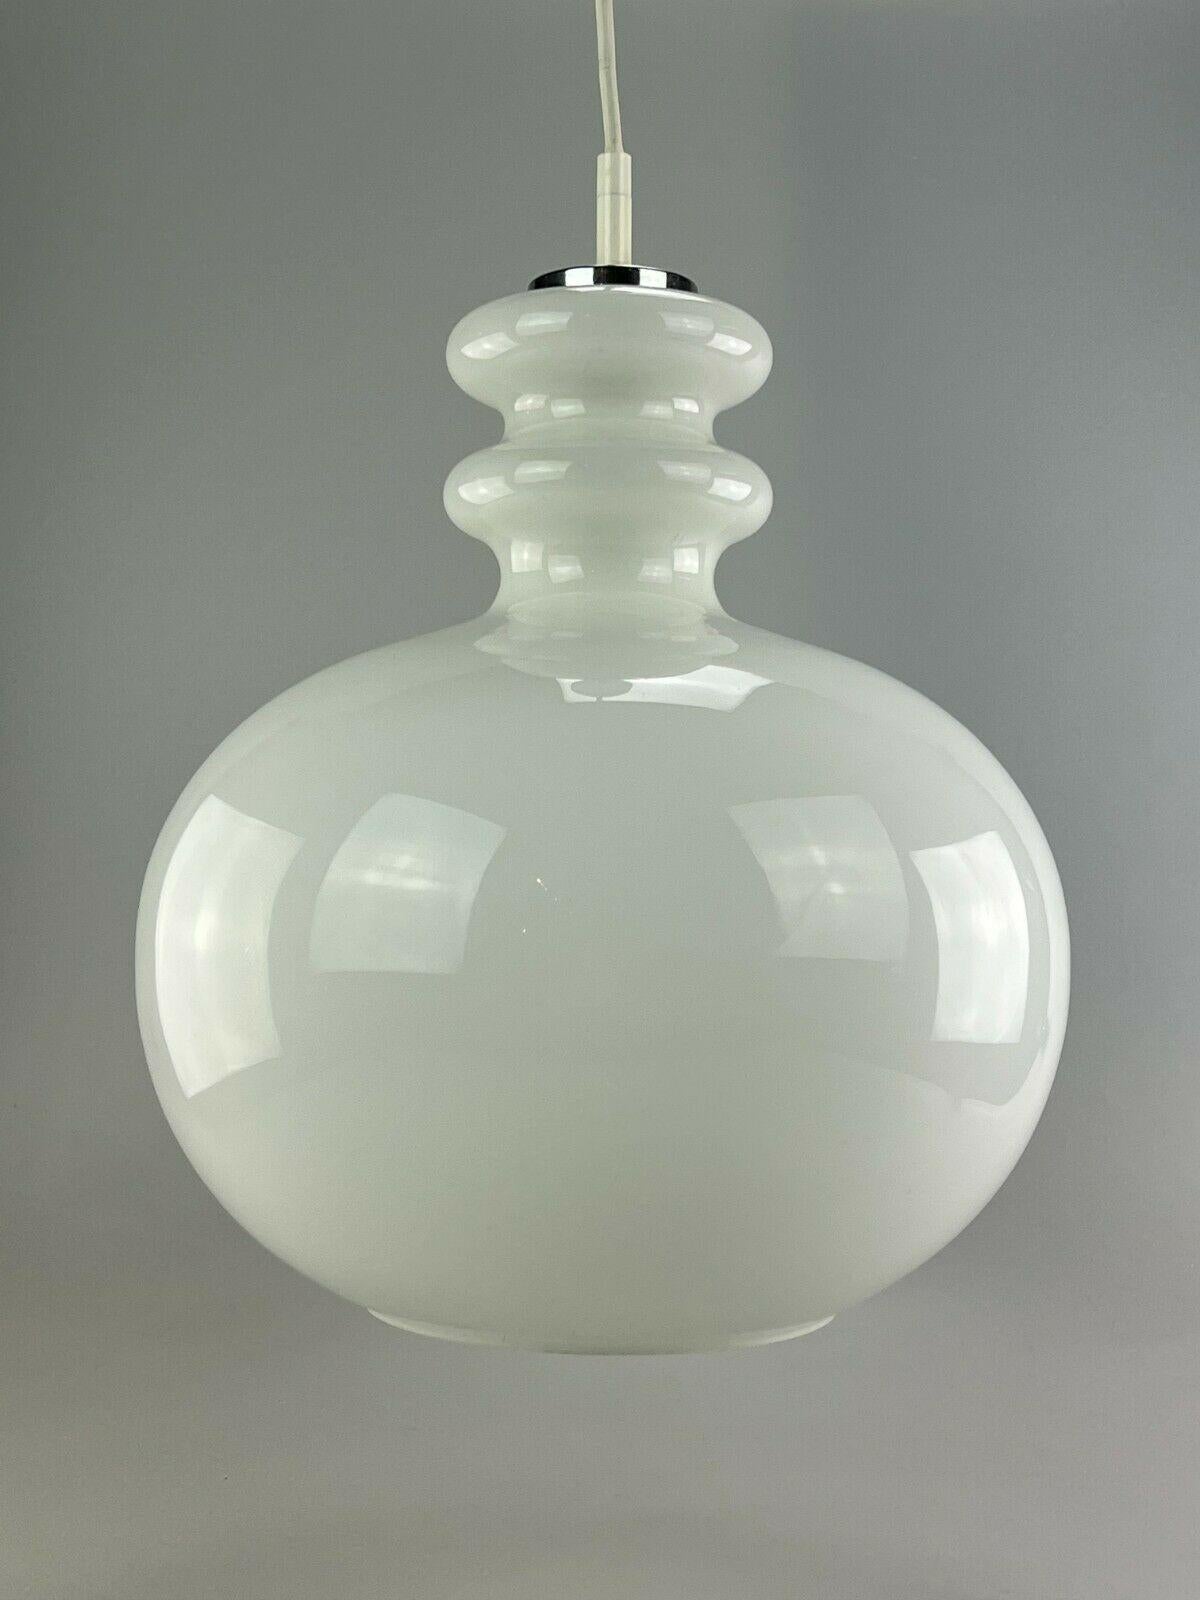 XL 60s 70s Peill & Putzler hanging lamp ceiling lamp glass space design 60s

Object: lamp

Manufacturer: Peill & Putzler

Condition: good

Age: around 1960-1970

Dimensions:

Diameter = 33cm
Height = 36cm

Other notes:

The pictures